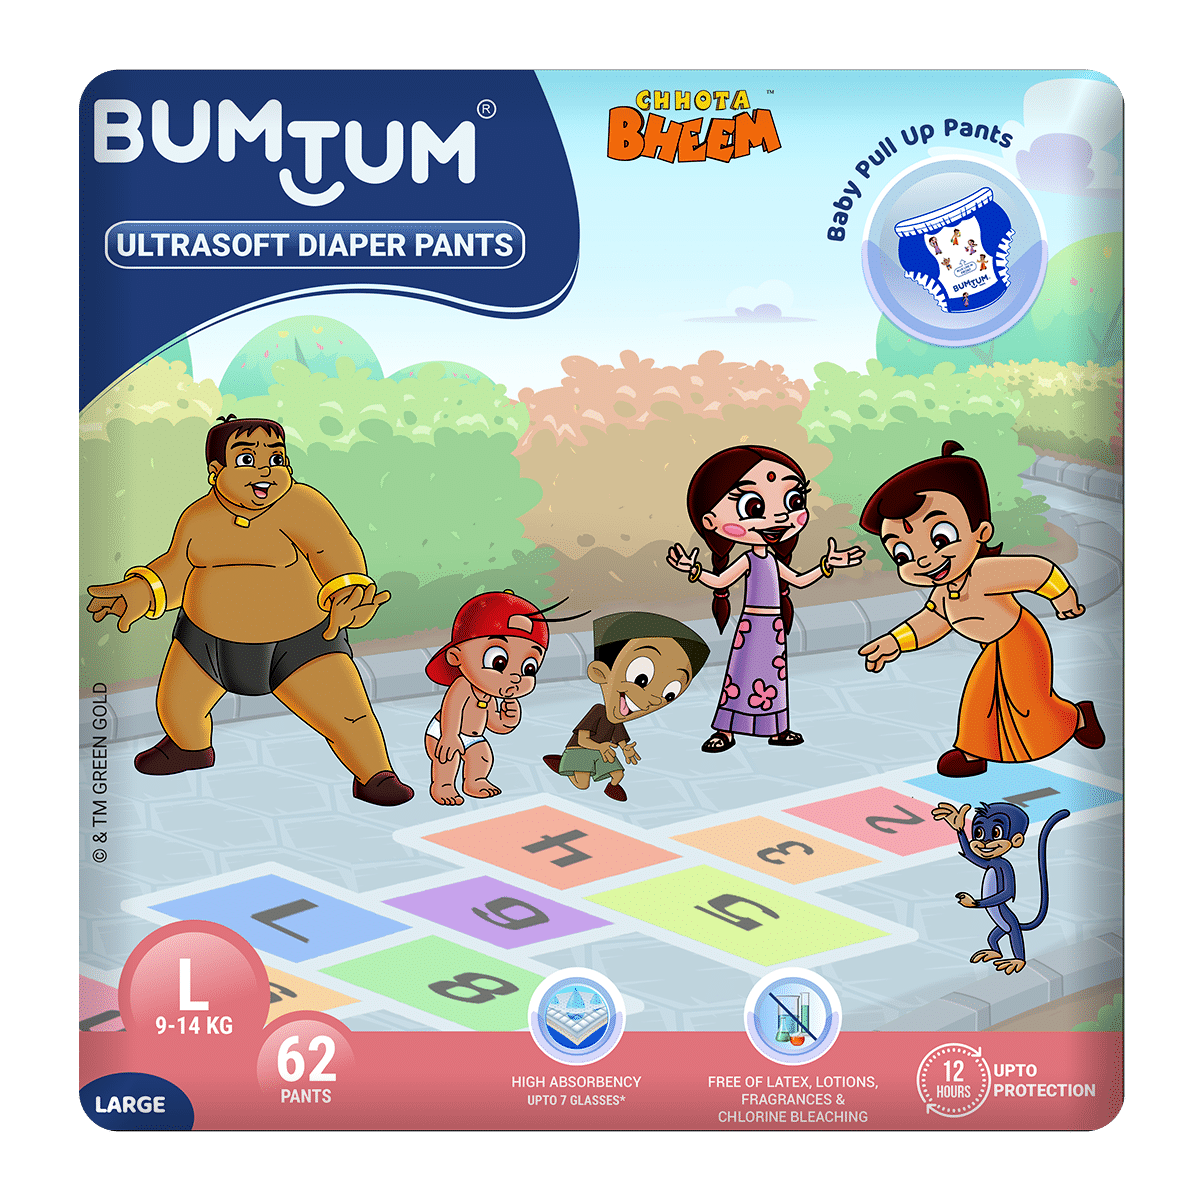 Bumtum Chota Bheem Baby Diaper Pants with Leakage Protection Medium 66  Pieces Online in India Buy at Best Price from Firstcrycom  13114302